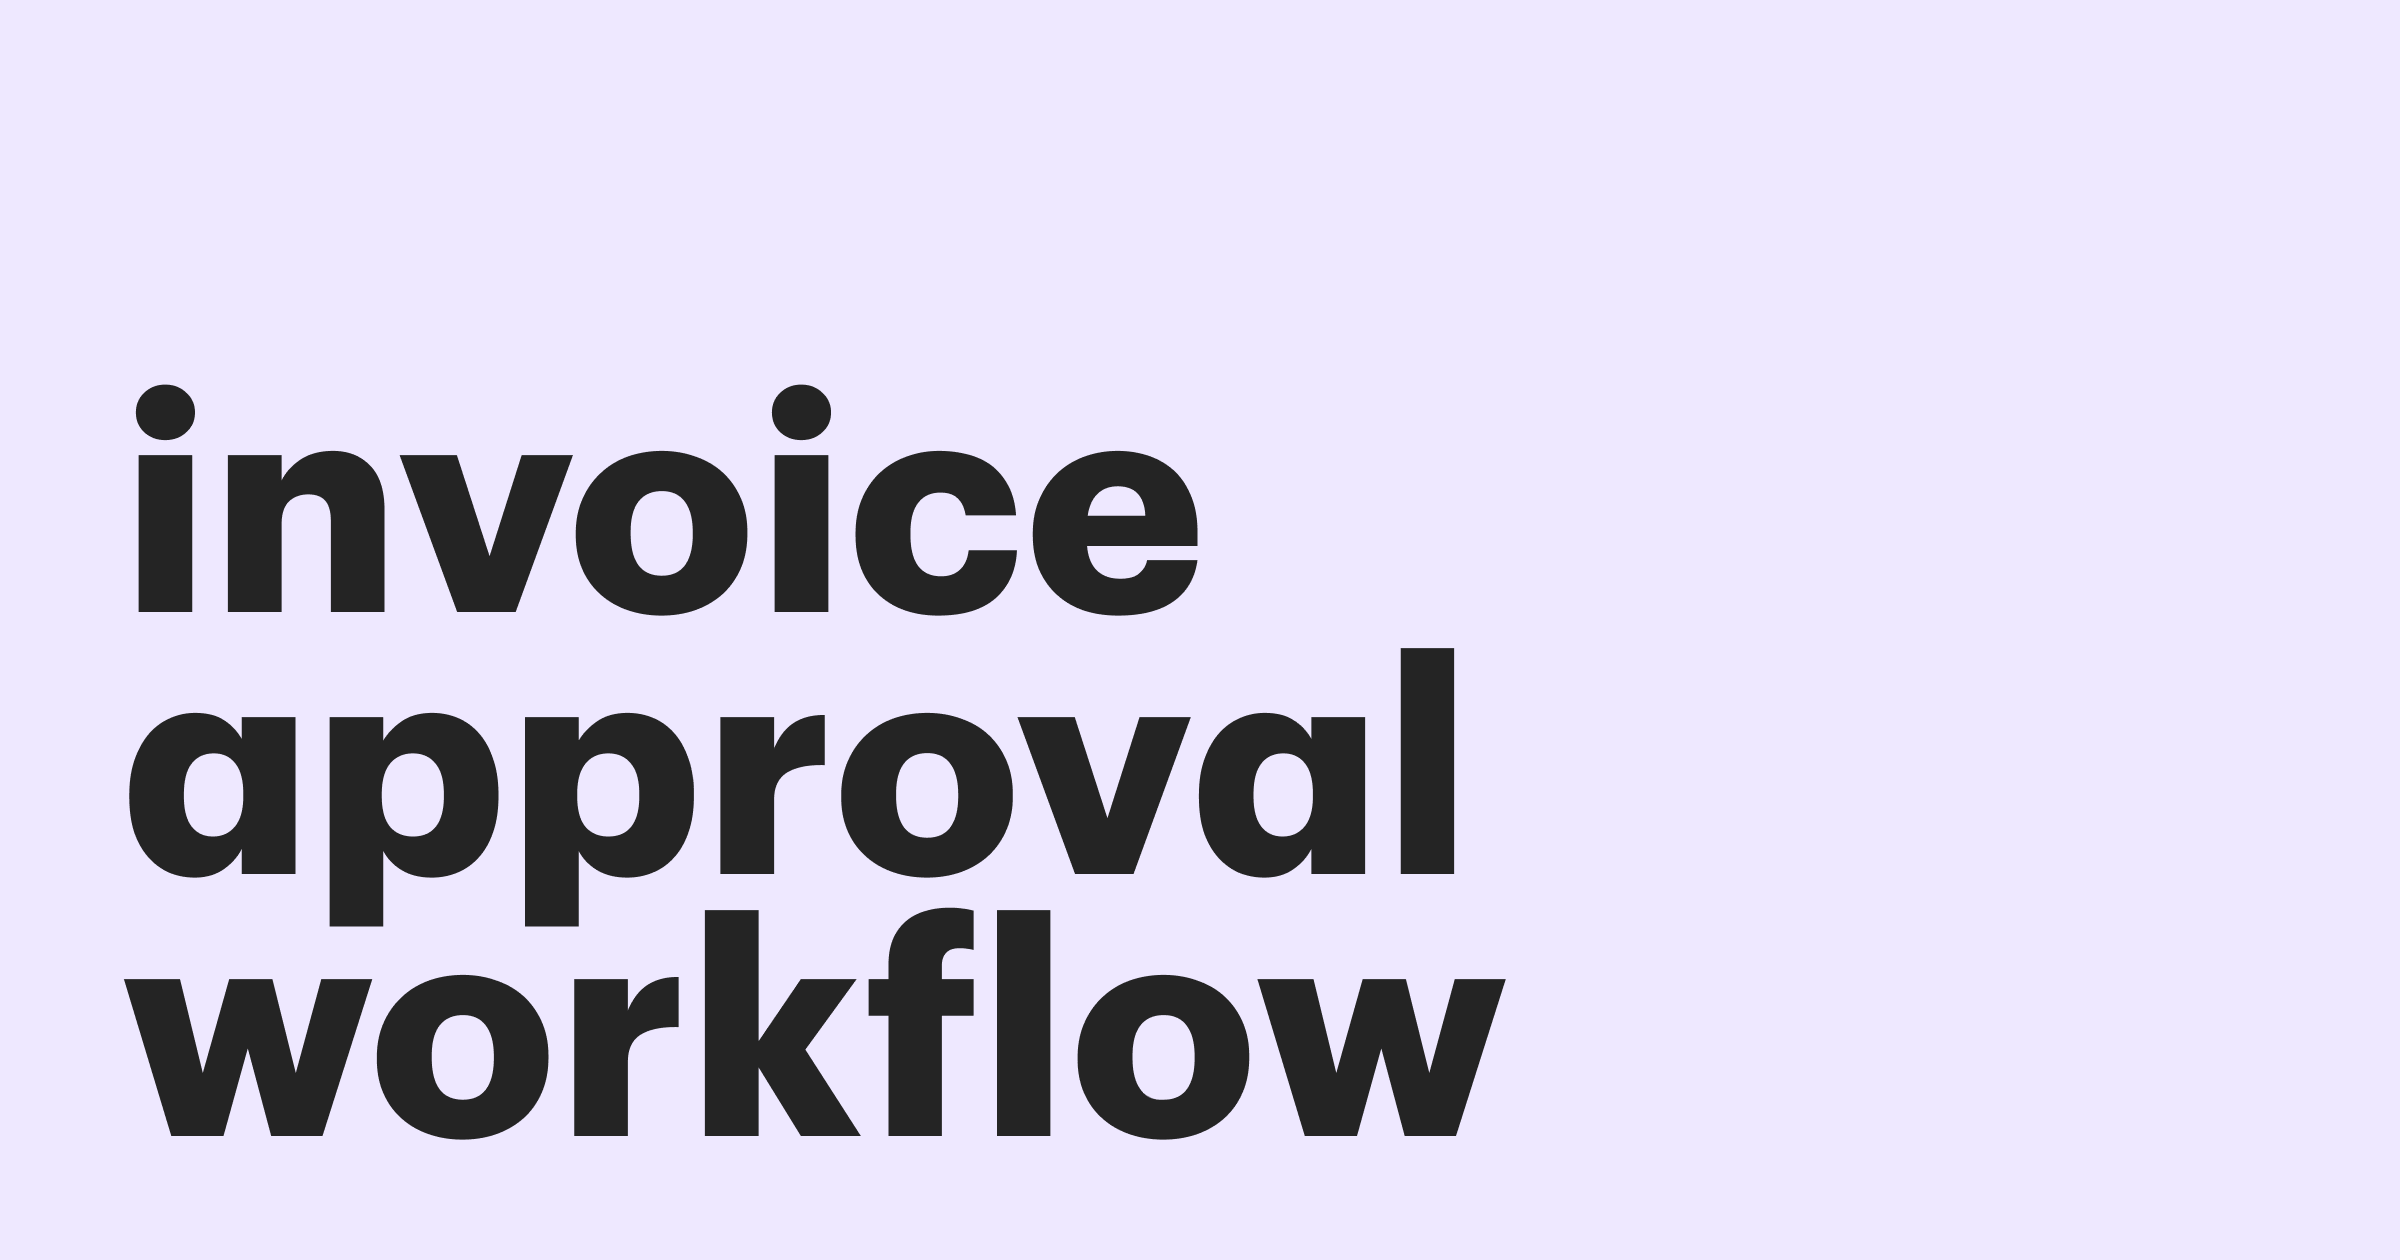 Invoice Approval Workflow Definition Benefits Steps Of Invoice Approval Workflow Pandadoc 9141